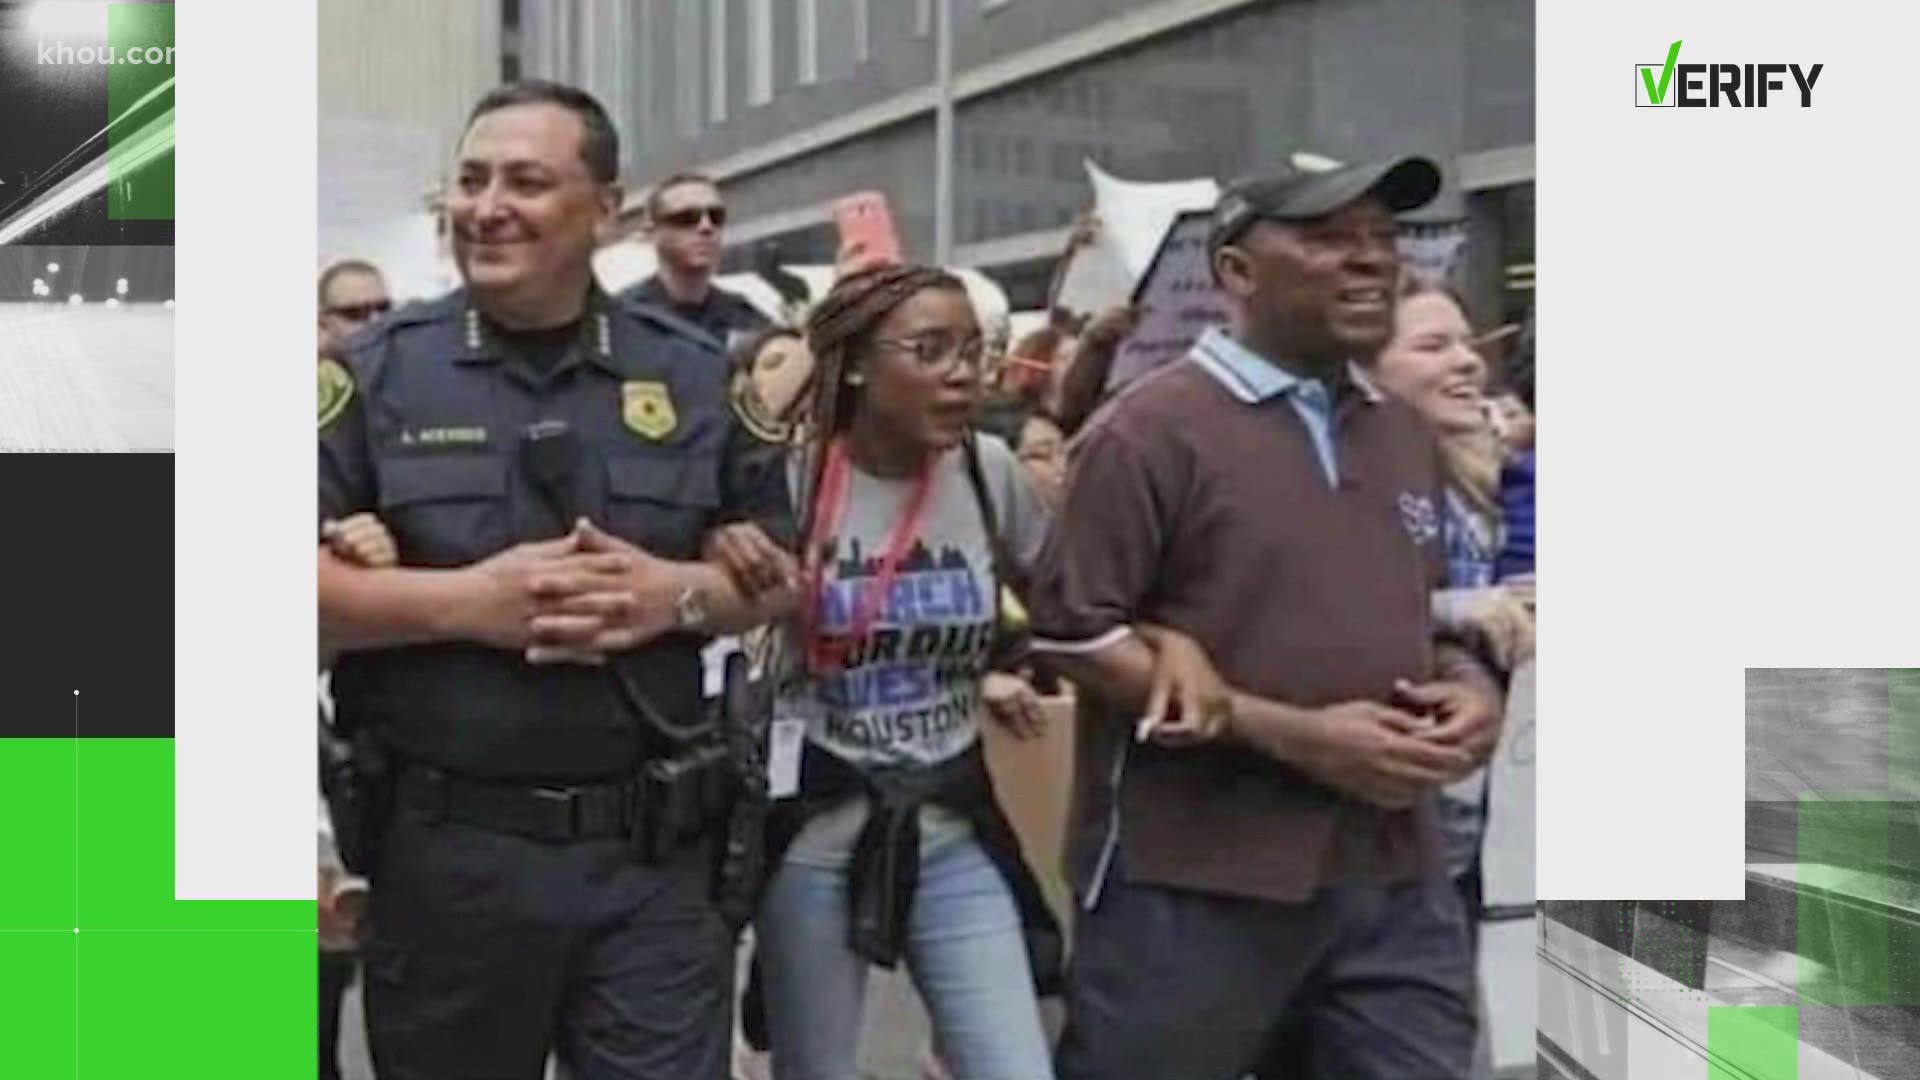 The photo implies that Mayor Sylvester Turner and Police Chief Art Acevedo were not wearing masks at a George Floyd rally in downtown.